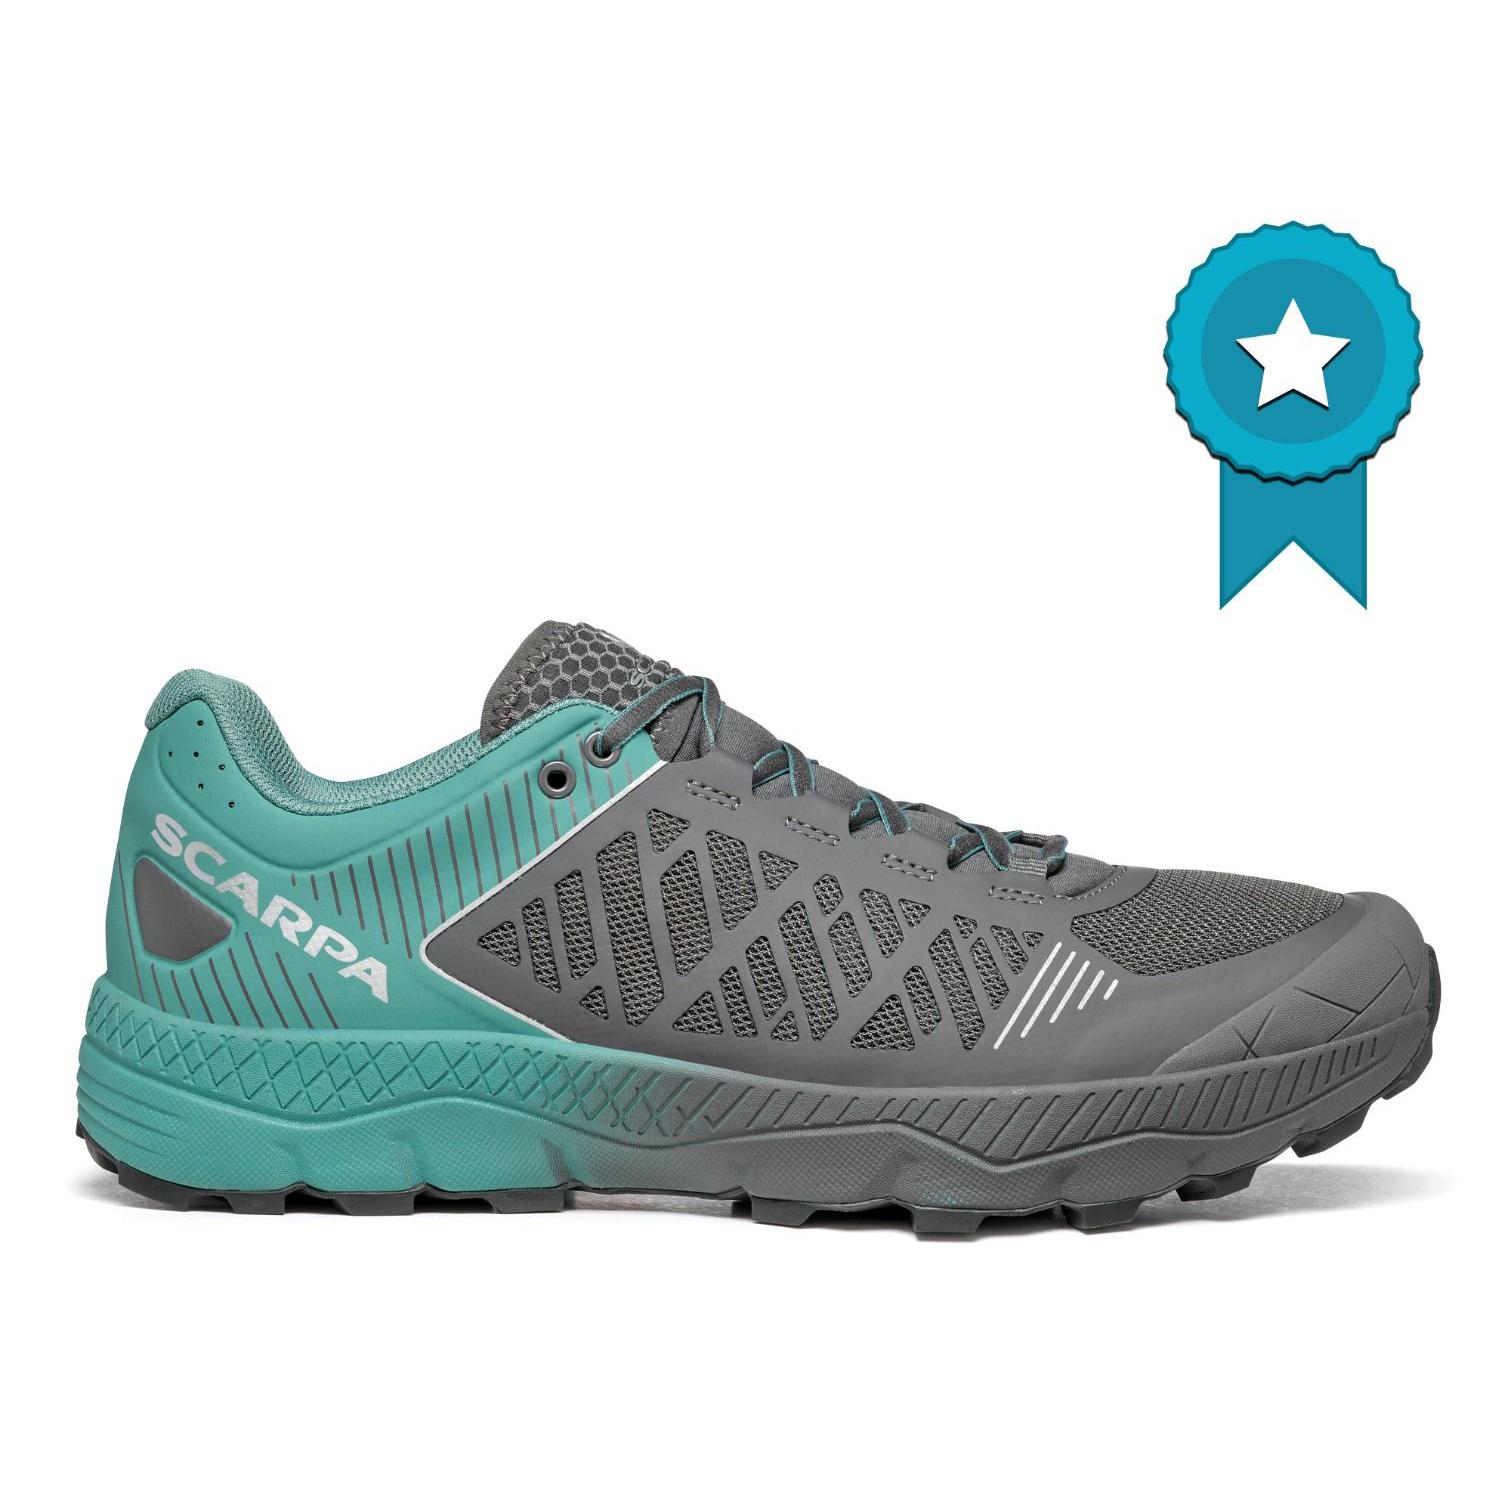 Sapatilhas Trail Running SCARPA Spin Ultra Masculino Grey/Turquoise | Portugal-15074